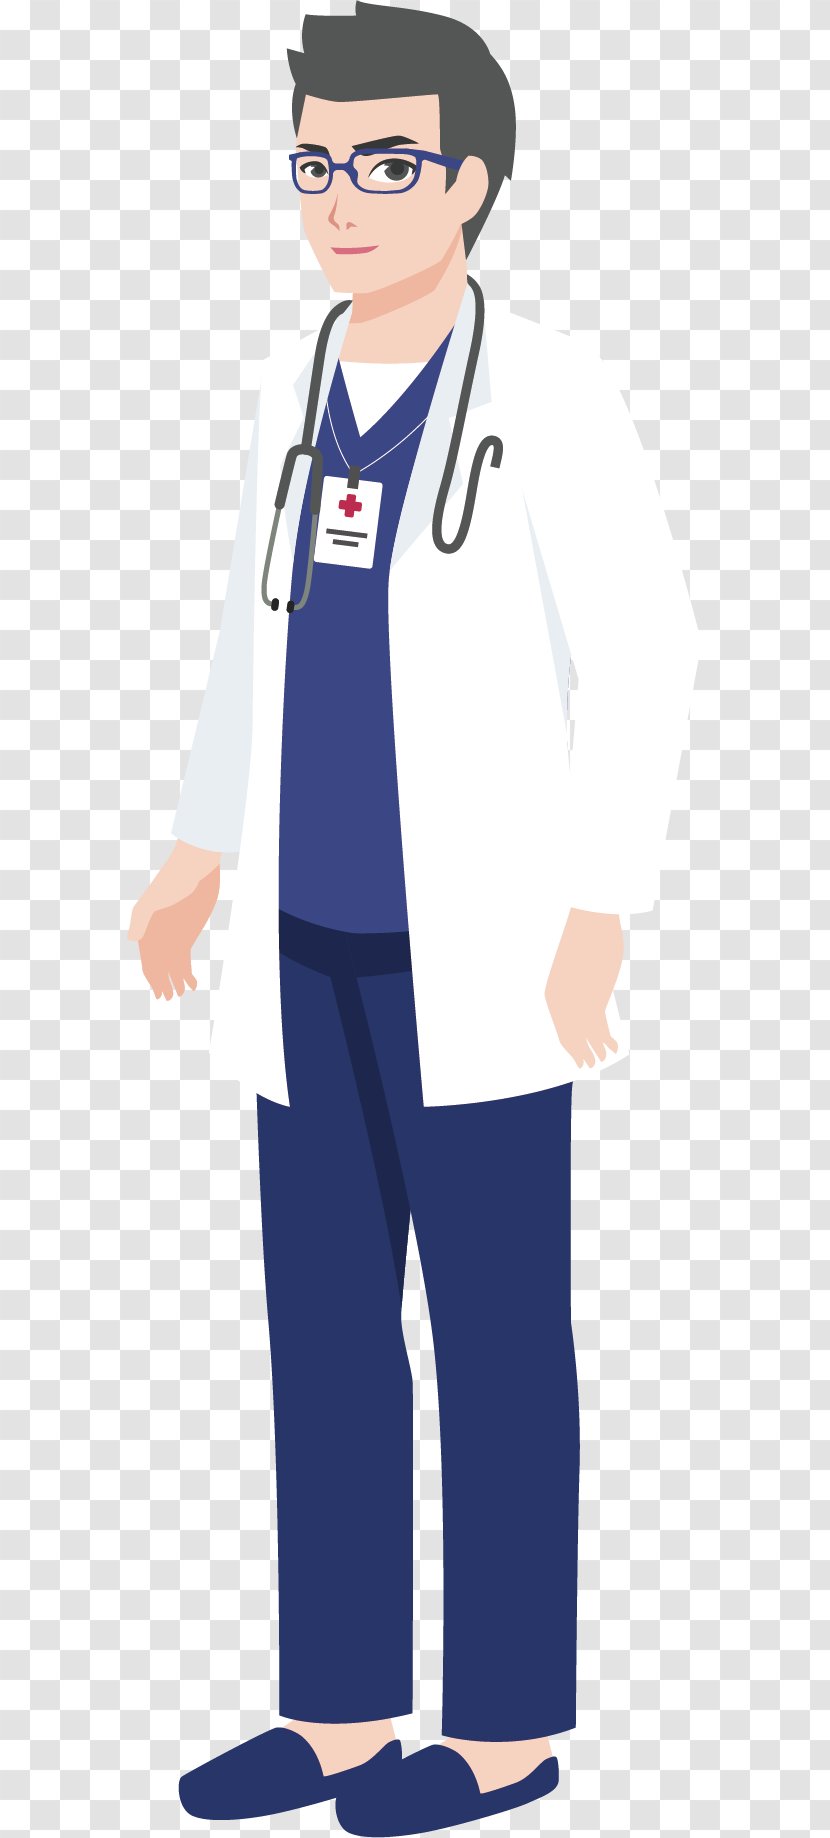 Cartoon Physician Illustration - Glasses - Original Chinese Doctor Transparent PNG